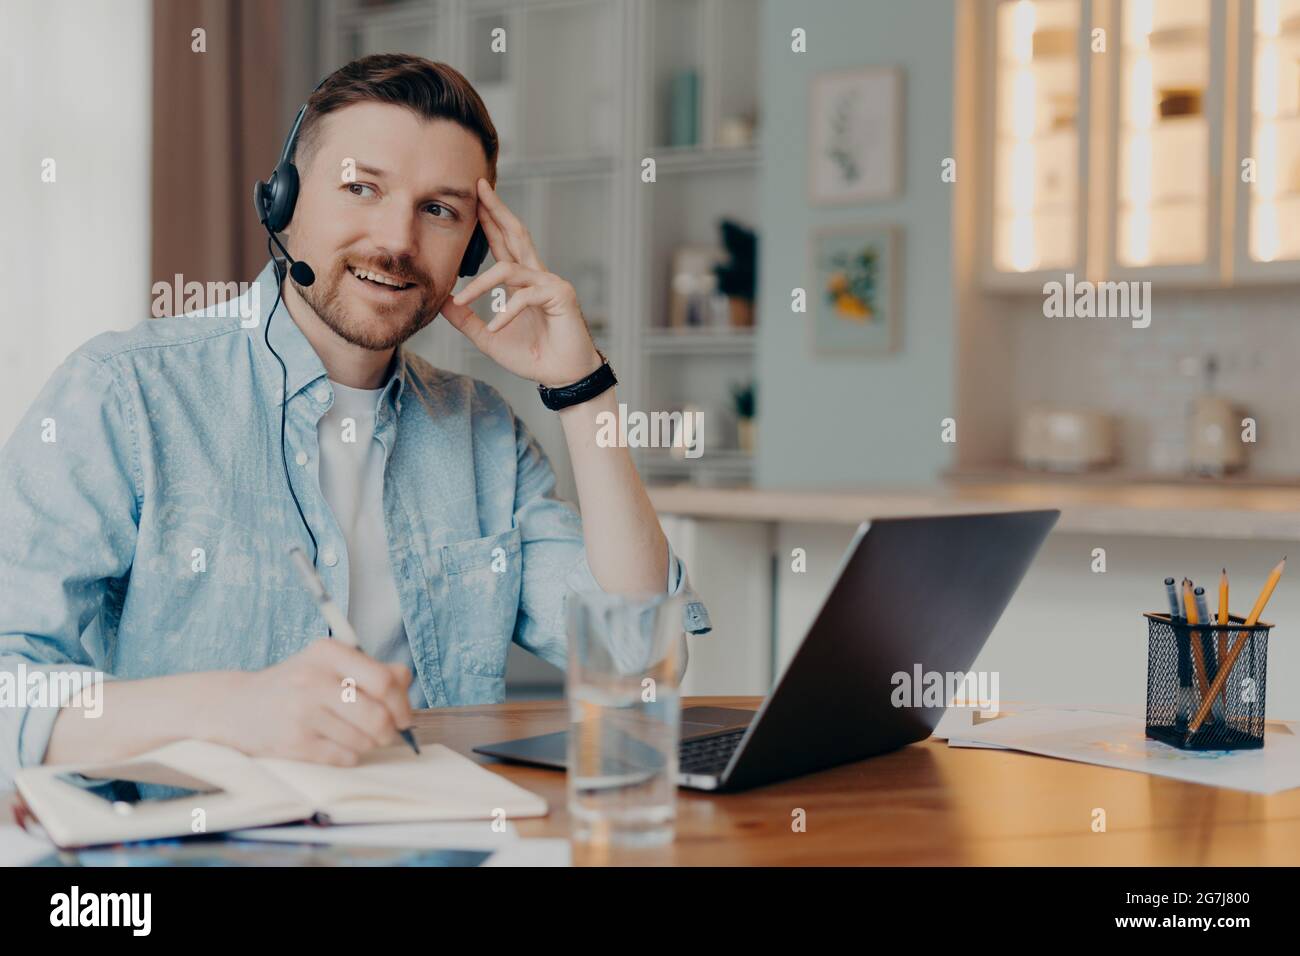 Pensive thoughtful man makes notes uses laptop computer headset writes down notes in notepad supplies customer support solves clients issues sits at Stock Photo